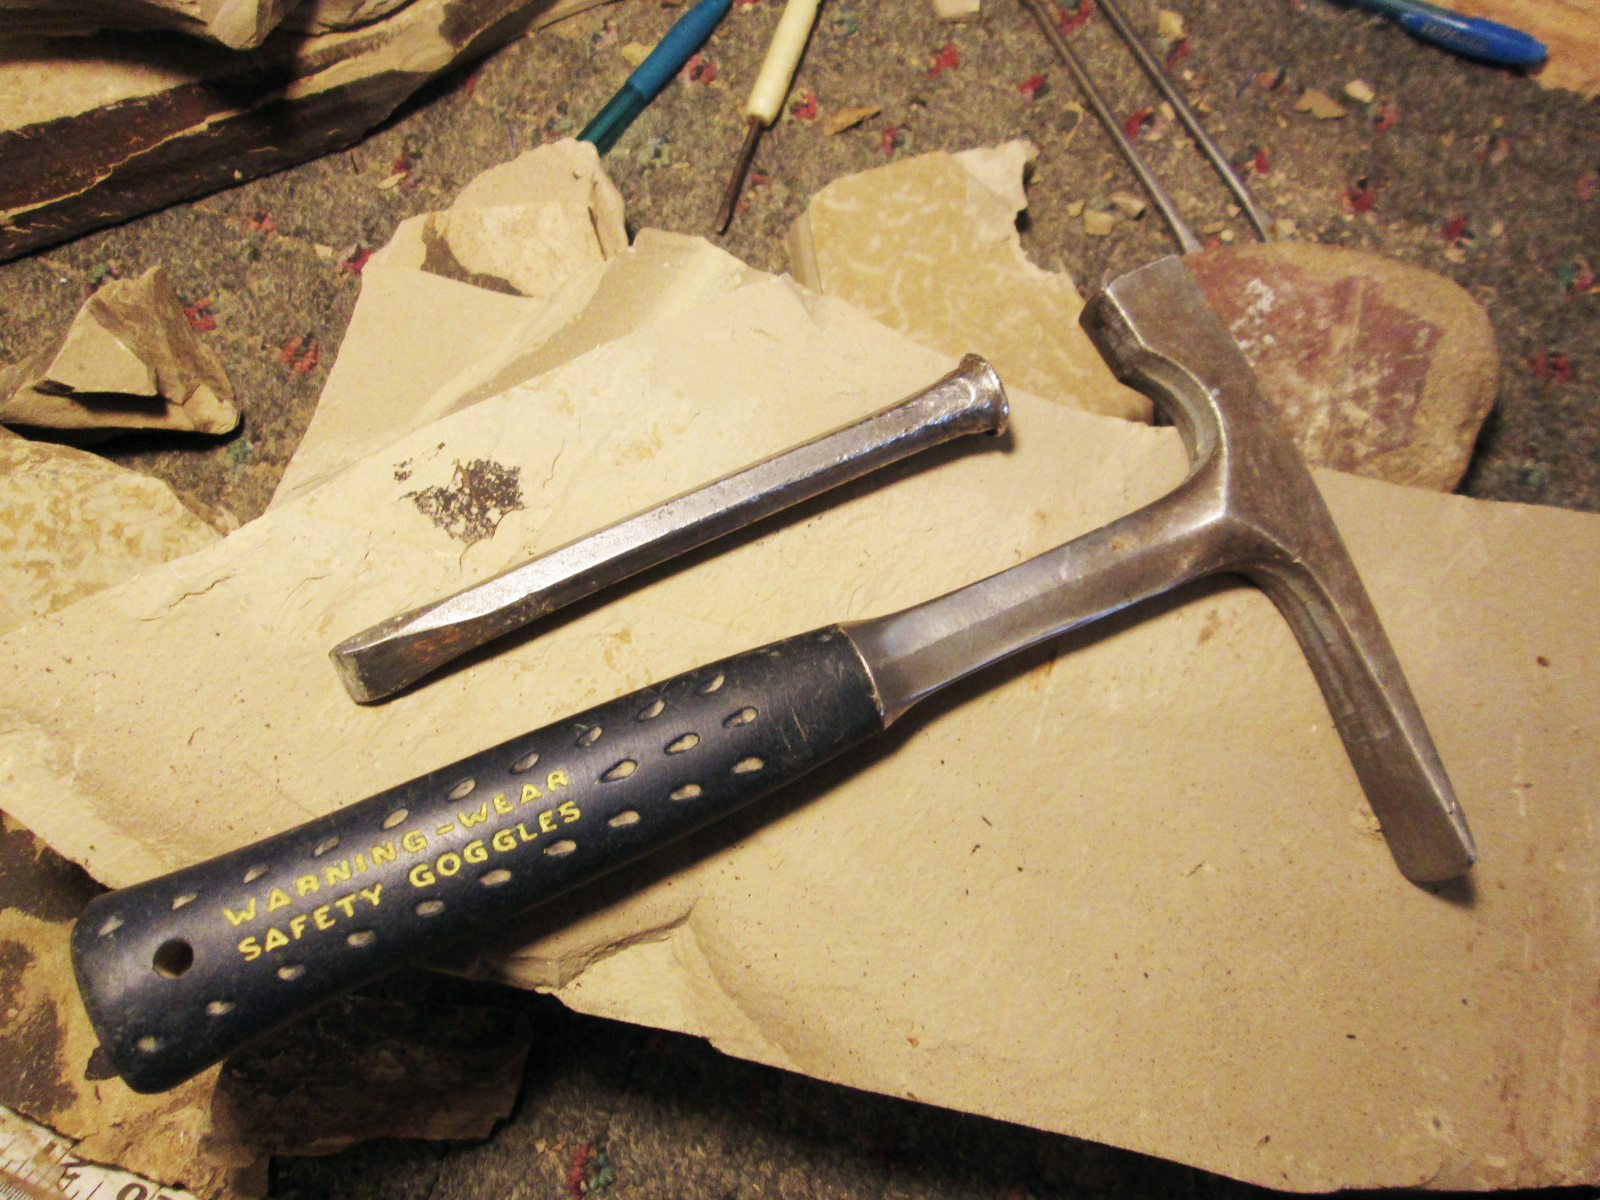 Bring rock hammers or tile hammers to use or rent tools from us to search for fossils.